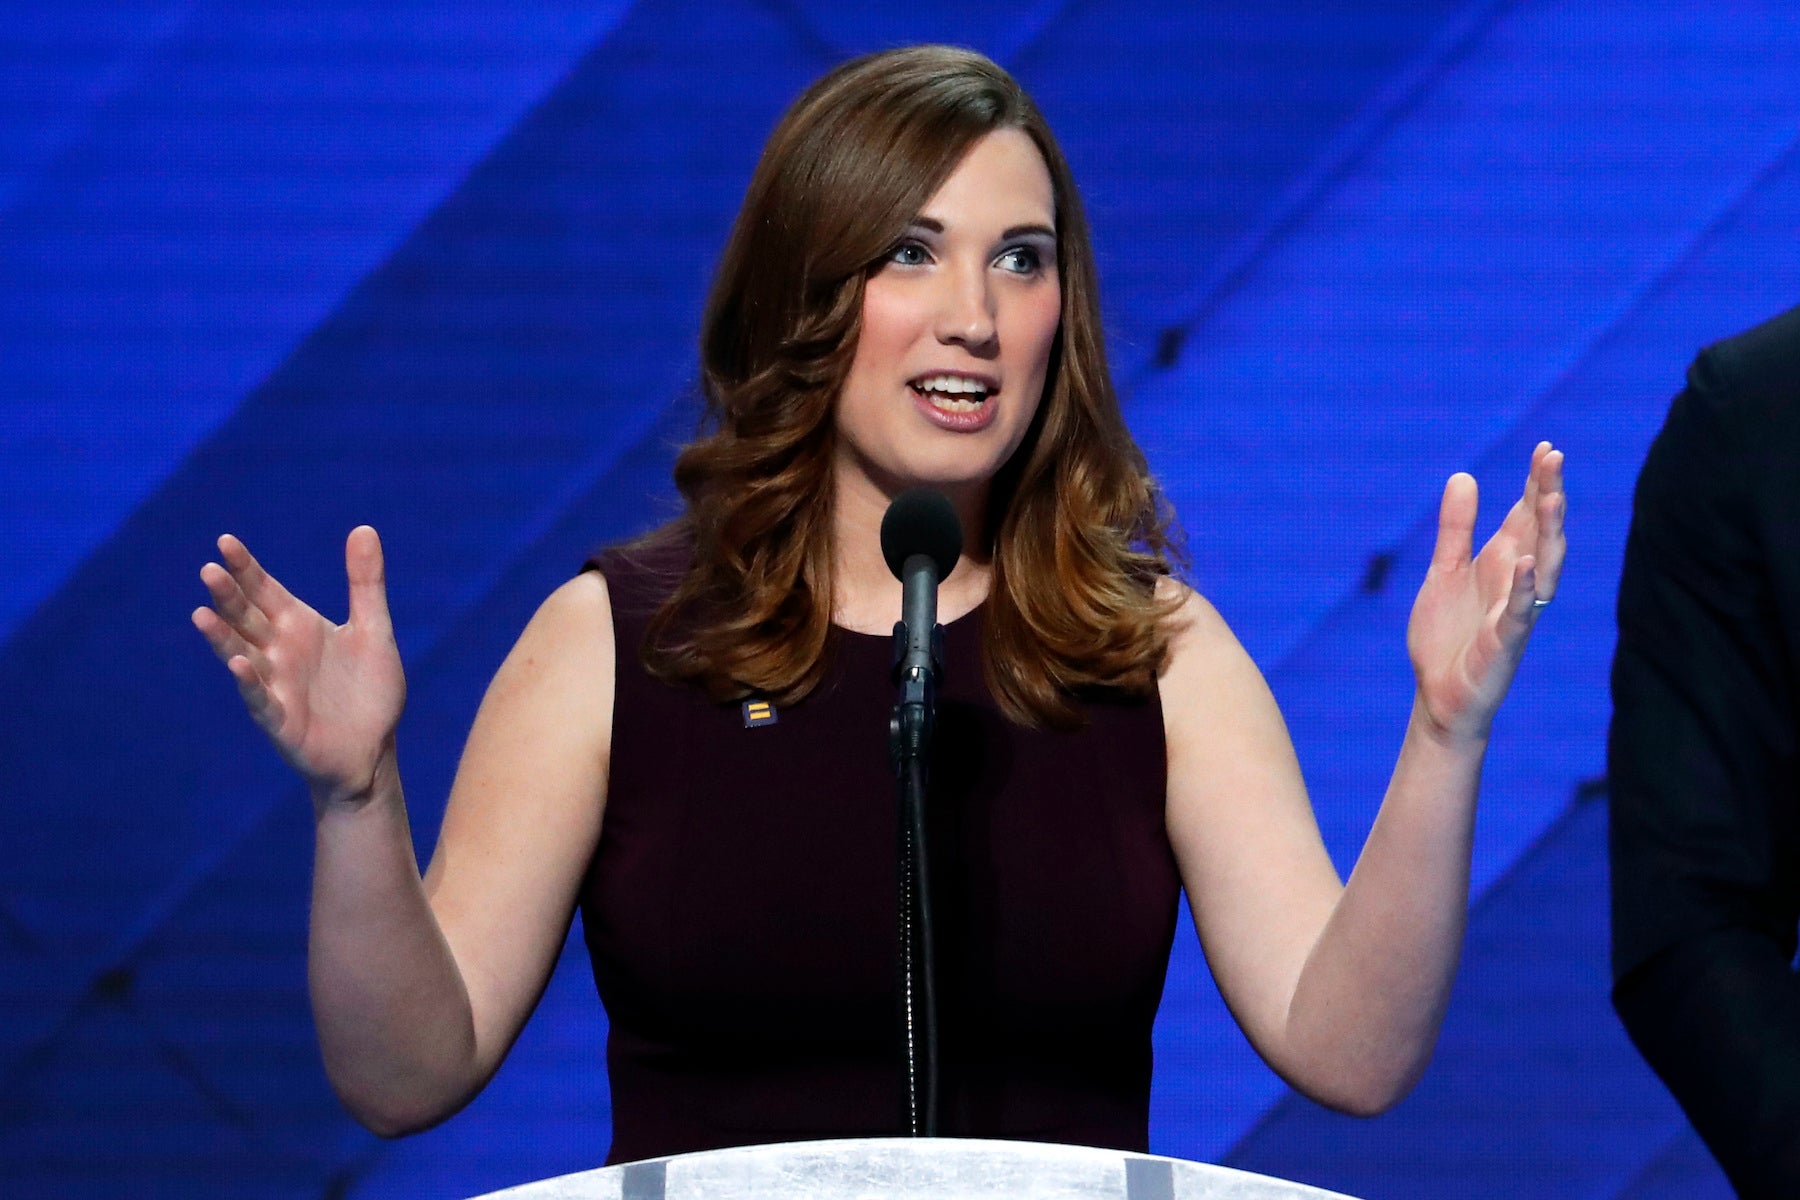 Del. state Sen. Sarah McBride could become the first trans person in Congress